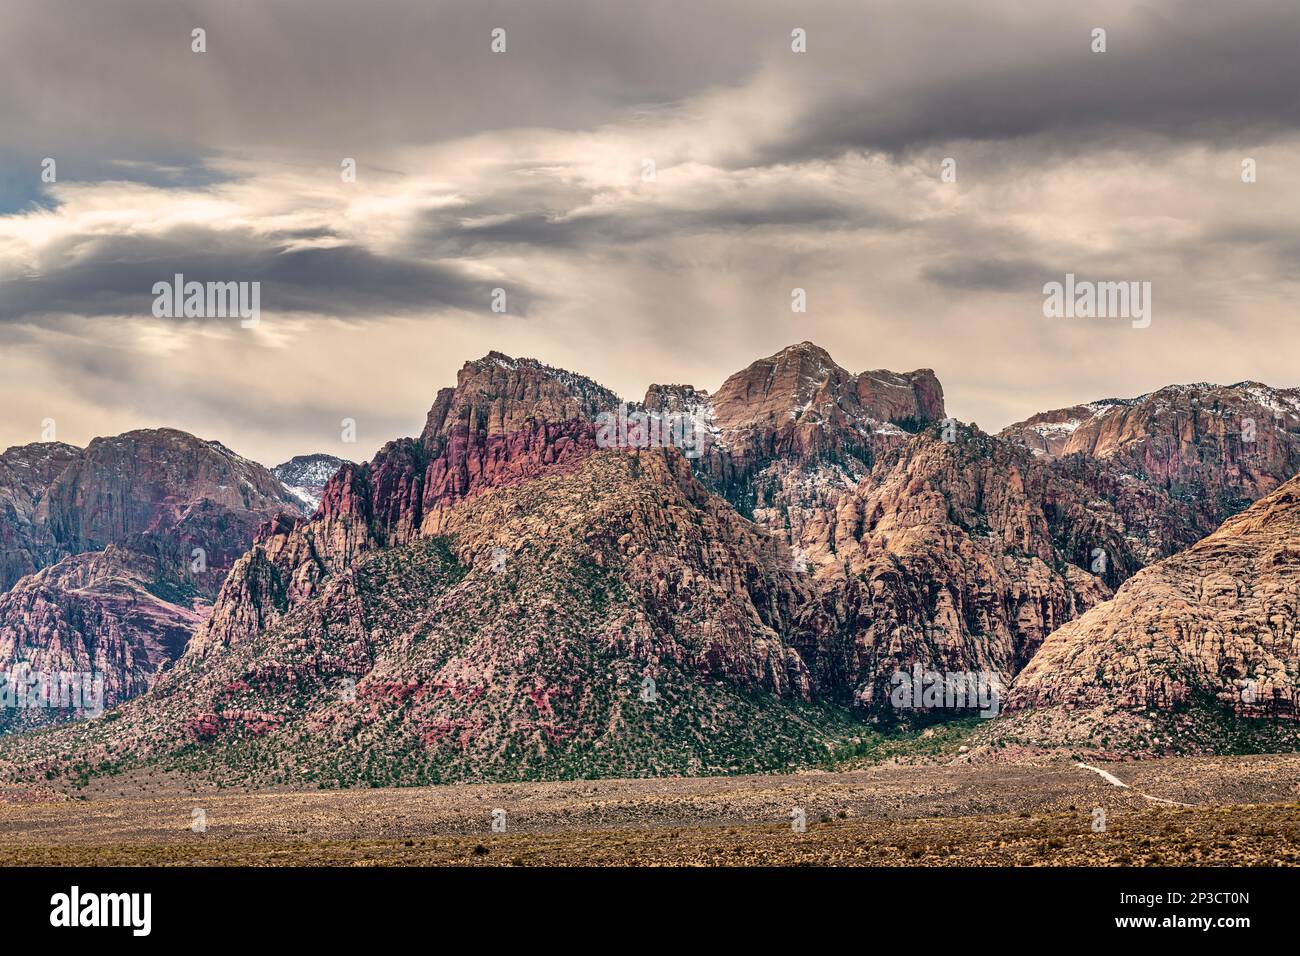 A beautiful, arid, rugged and mountainous scene in the wilderness of Red Rock Canyon in Las Vegas, Nevada, where families travel. Stock Photo